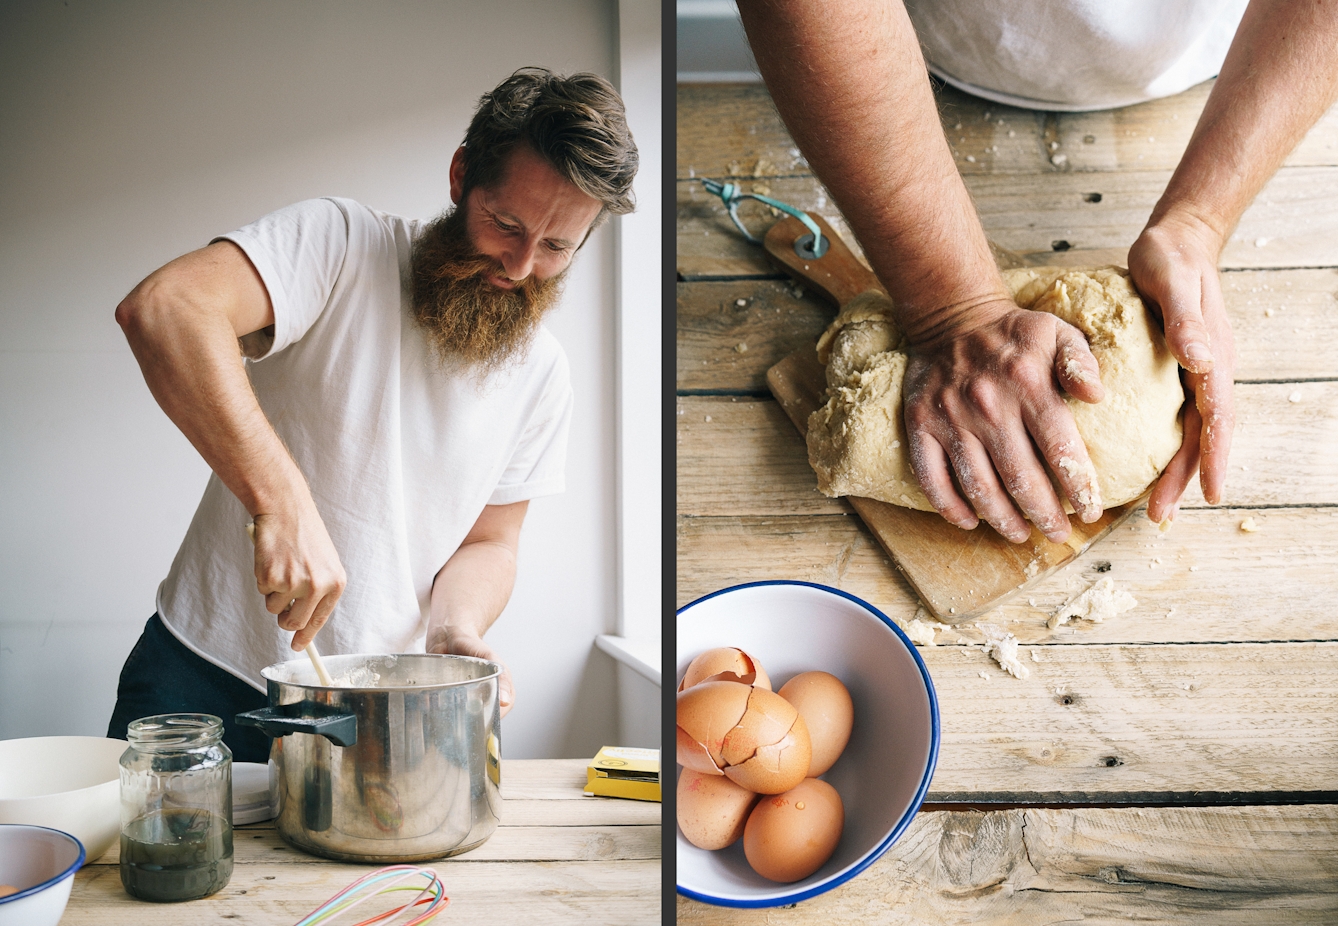 Photographic diptych. The image on the left shows a bearded man in a white t-shirt standing at a wooden kitchen table, stirring a mixture in a large saucepan with a wooden spoon. The saucepan is surrounded by kitchen utensils, a jar of green liquid and a couple of bowls. The image on the right shows a wooden kitchen table from above. A man's hands are kneading a dough mixture on a wooden chopping board. There is also a bowl containing several broken egg shells.